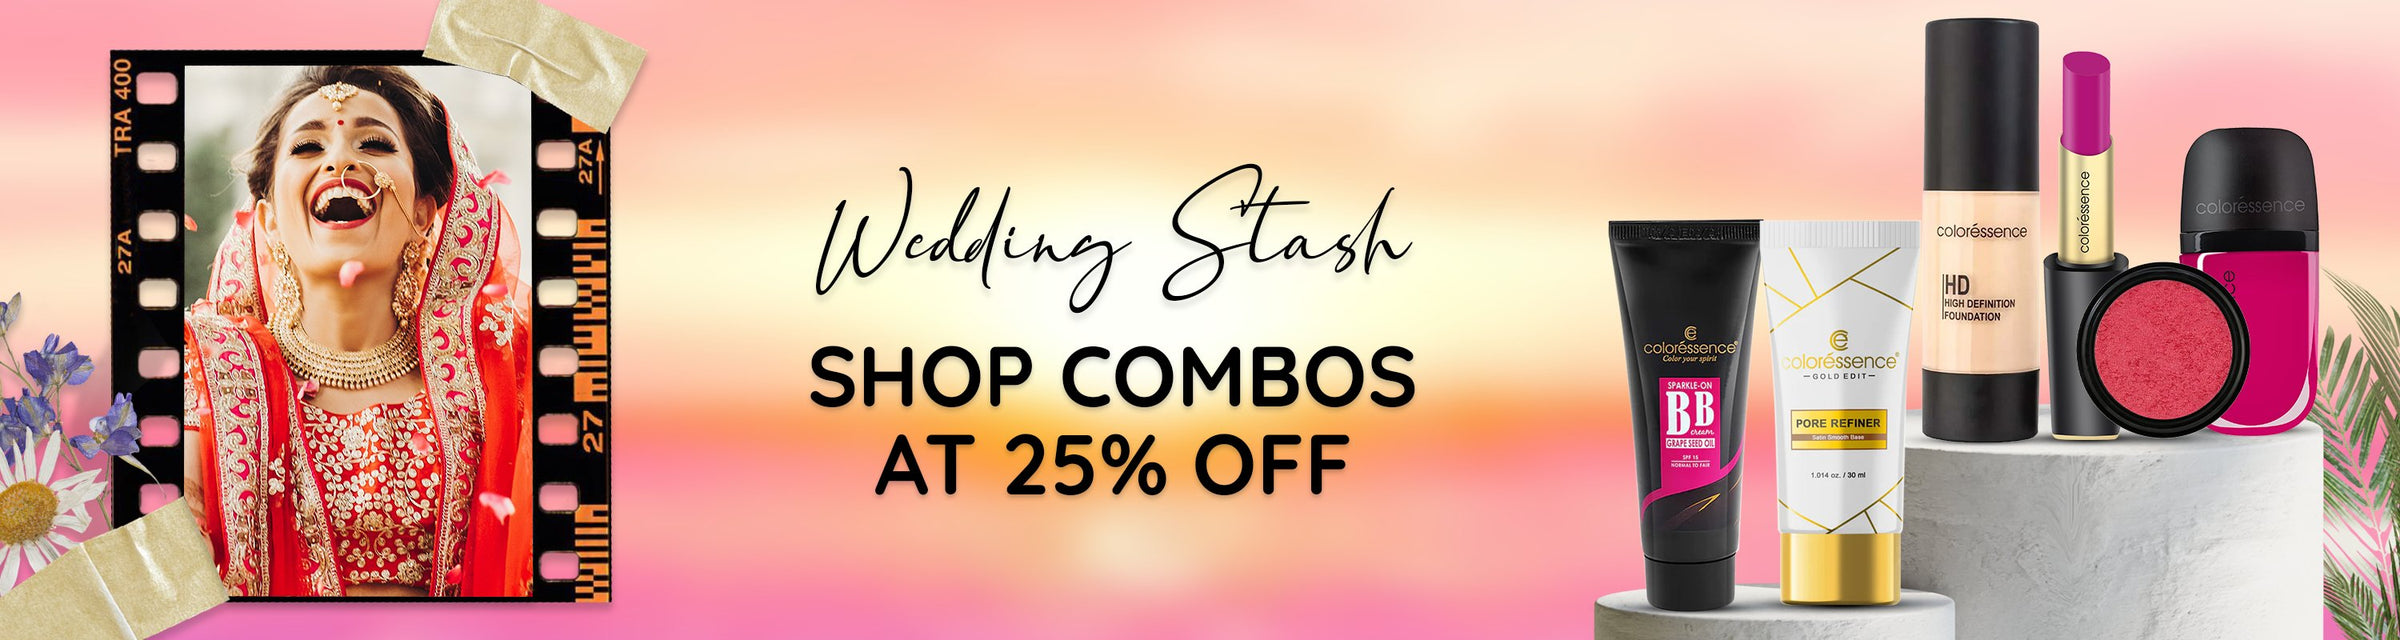 Combos at 25% OFF